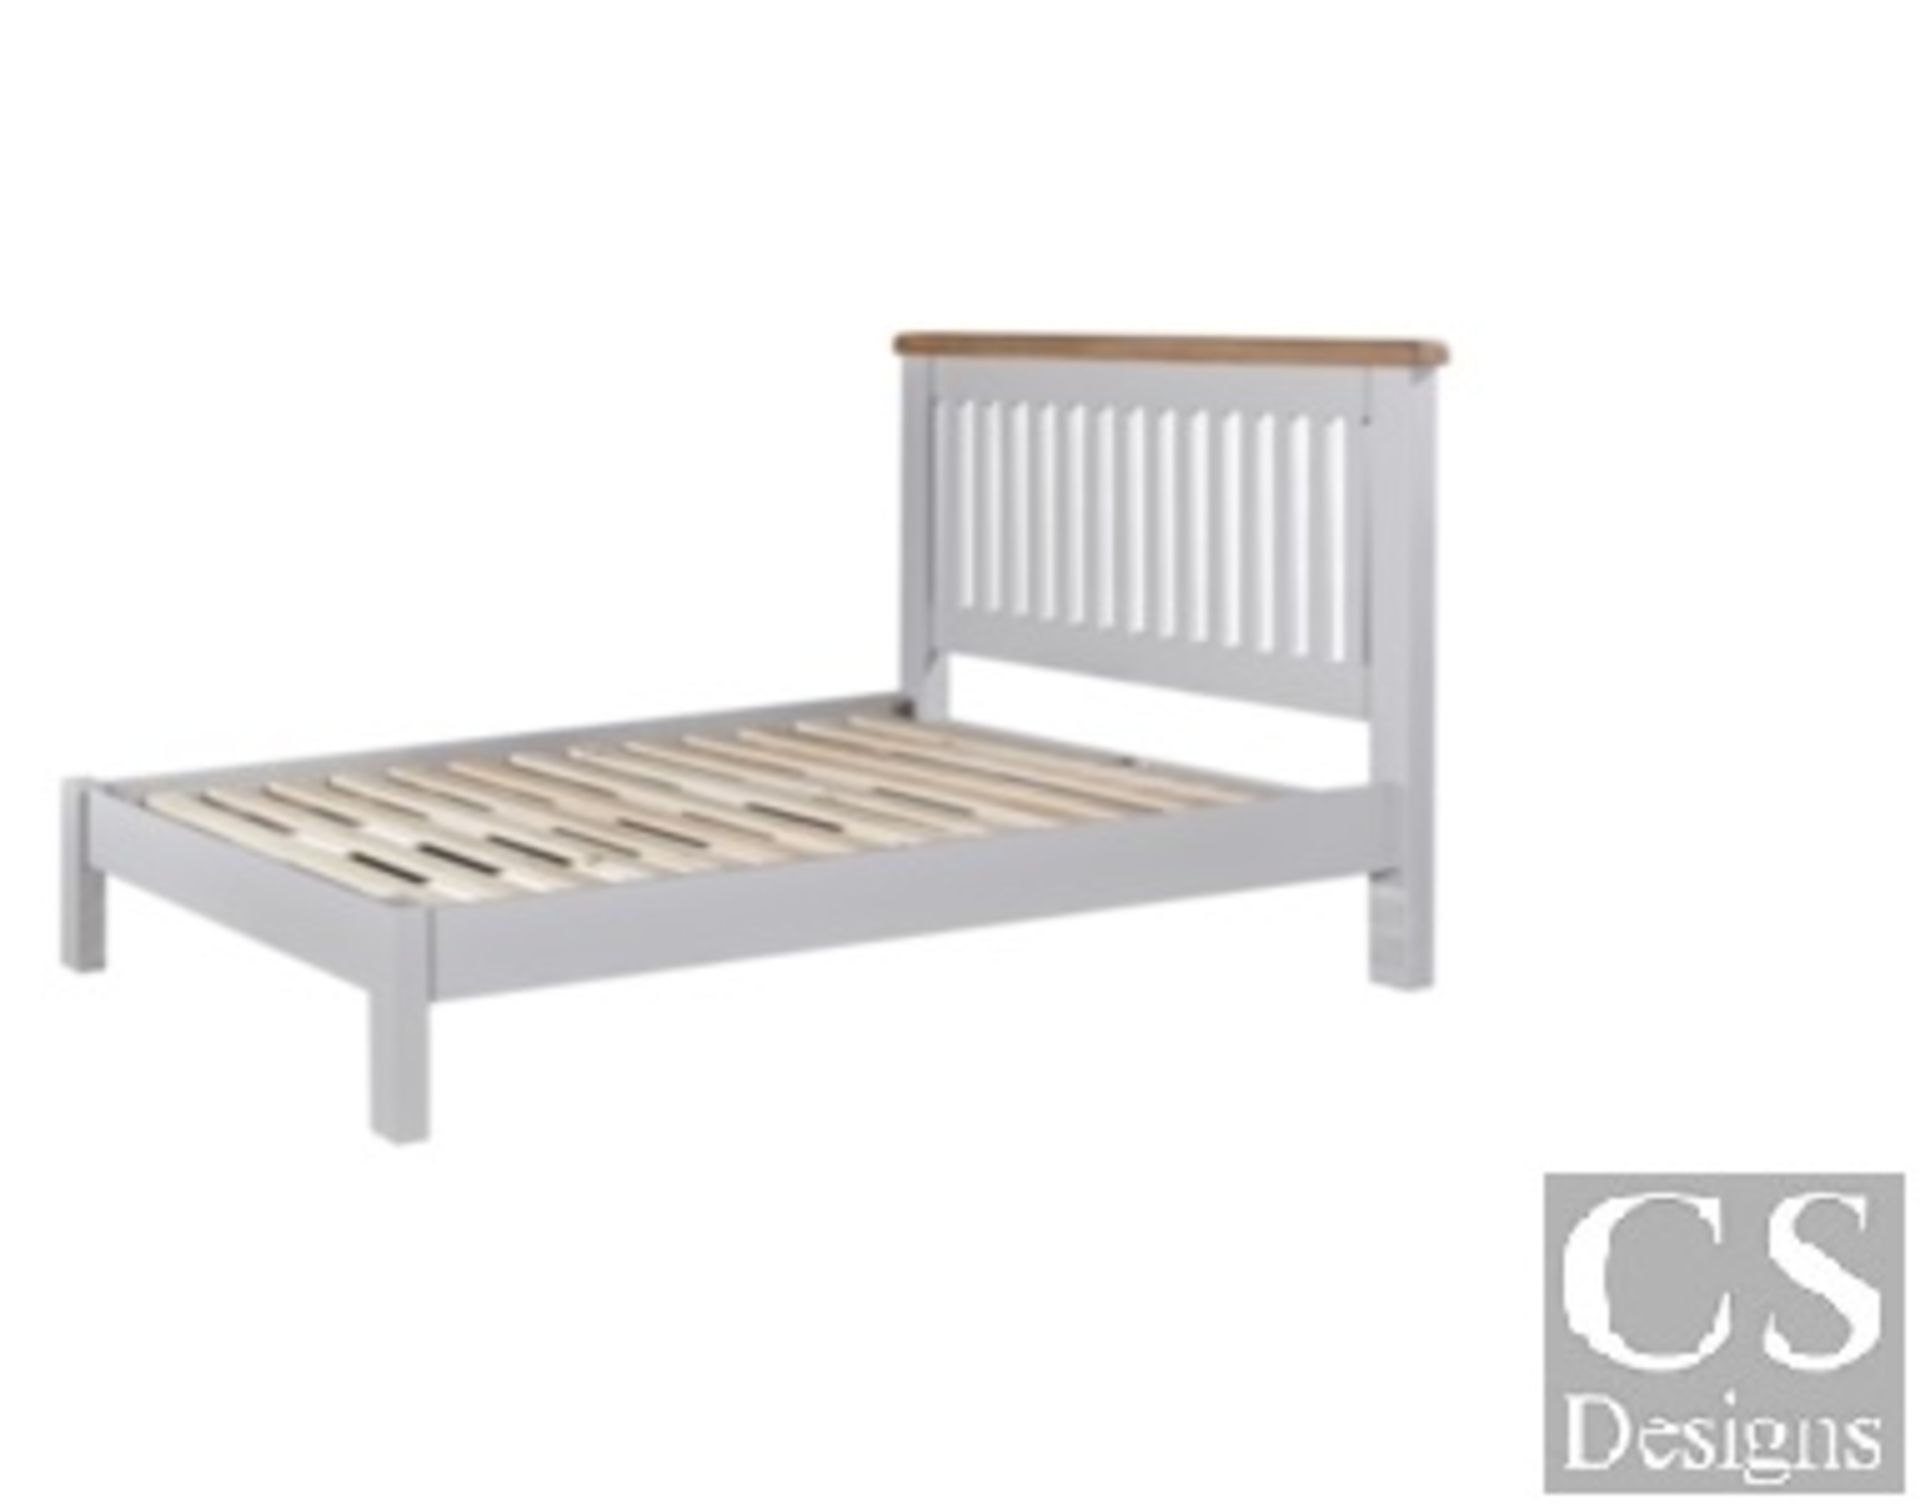 + VAT Brand New CS Designs "Daylesford" Double Bed Frame With Natural Oak & Solid Hardwood Painted - Image 3 of 3